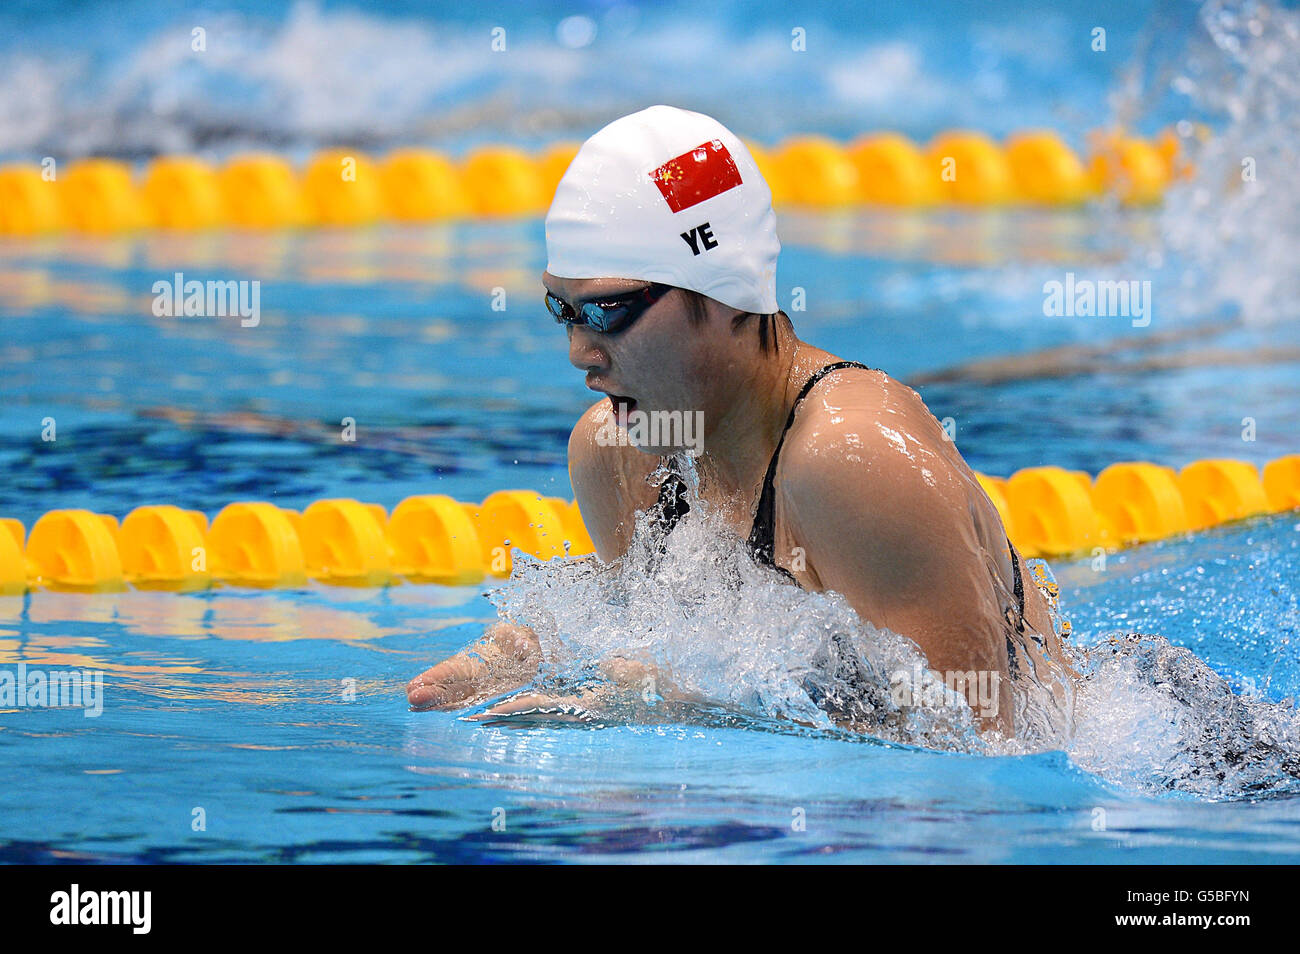 China's Shiwen Ye in action in the second Women's 200m Freestyle Semifinal at the Aquatics Centre in the Olympic Park, London Stock Photo